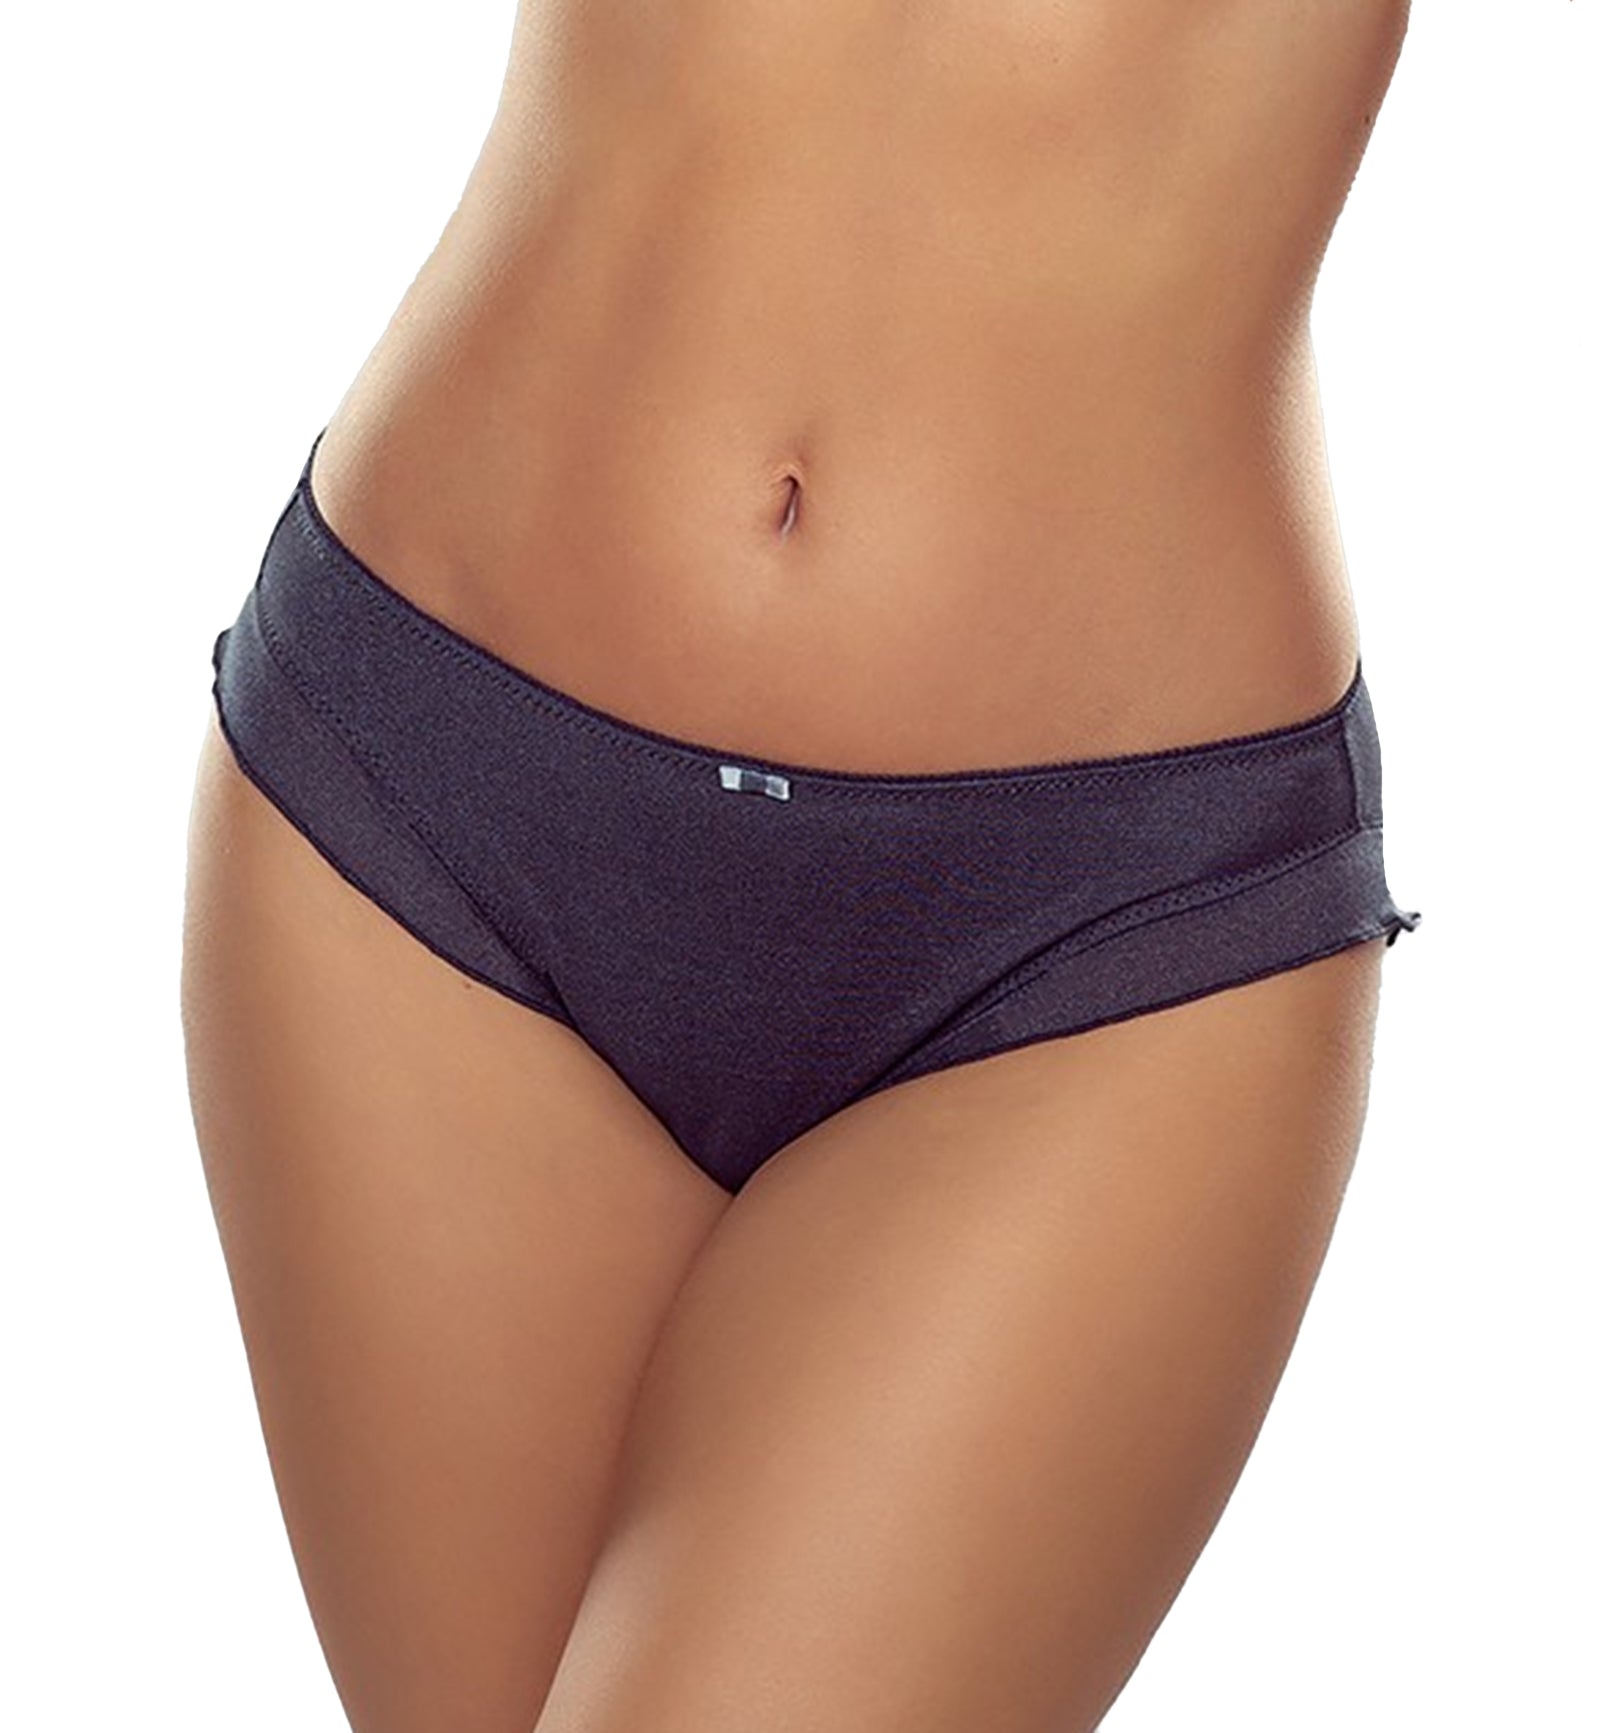 Comexim Hematite Matching Panty (CMHEMATMP),Small,Steel Grey - Steel Grey,Small